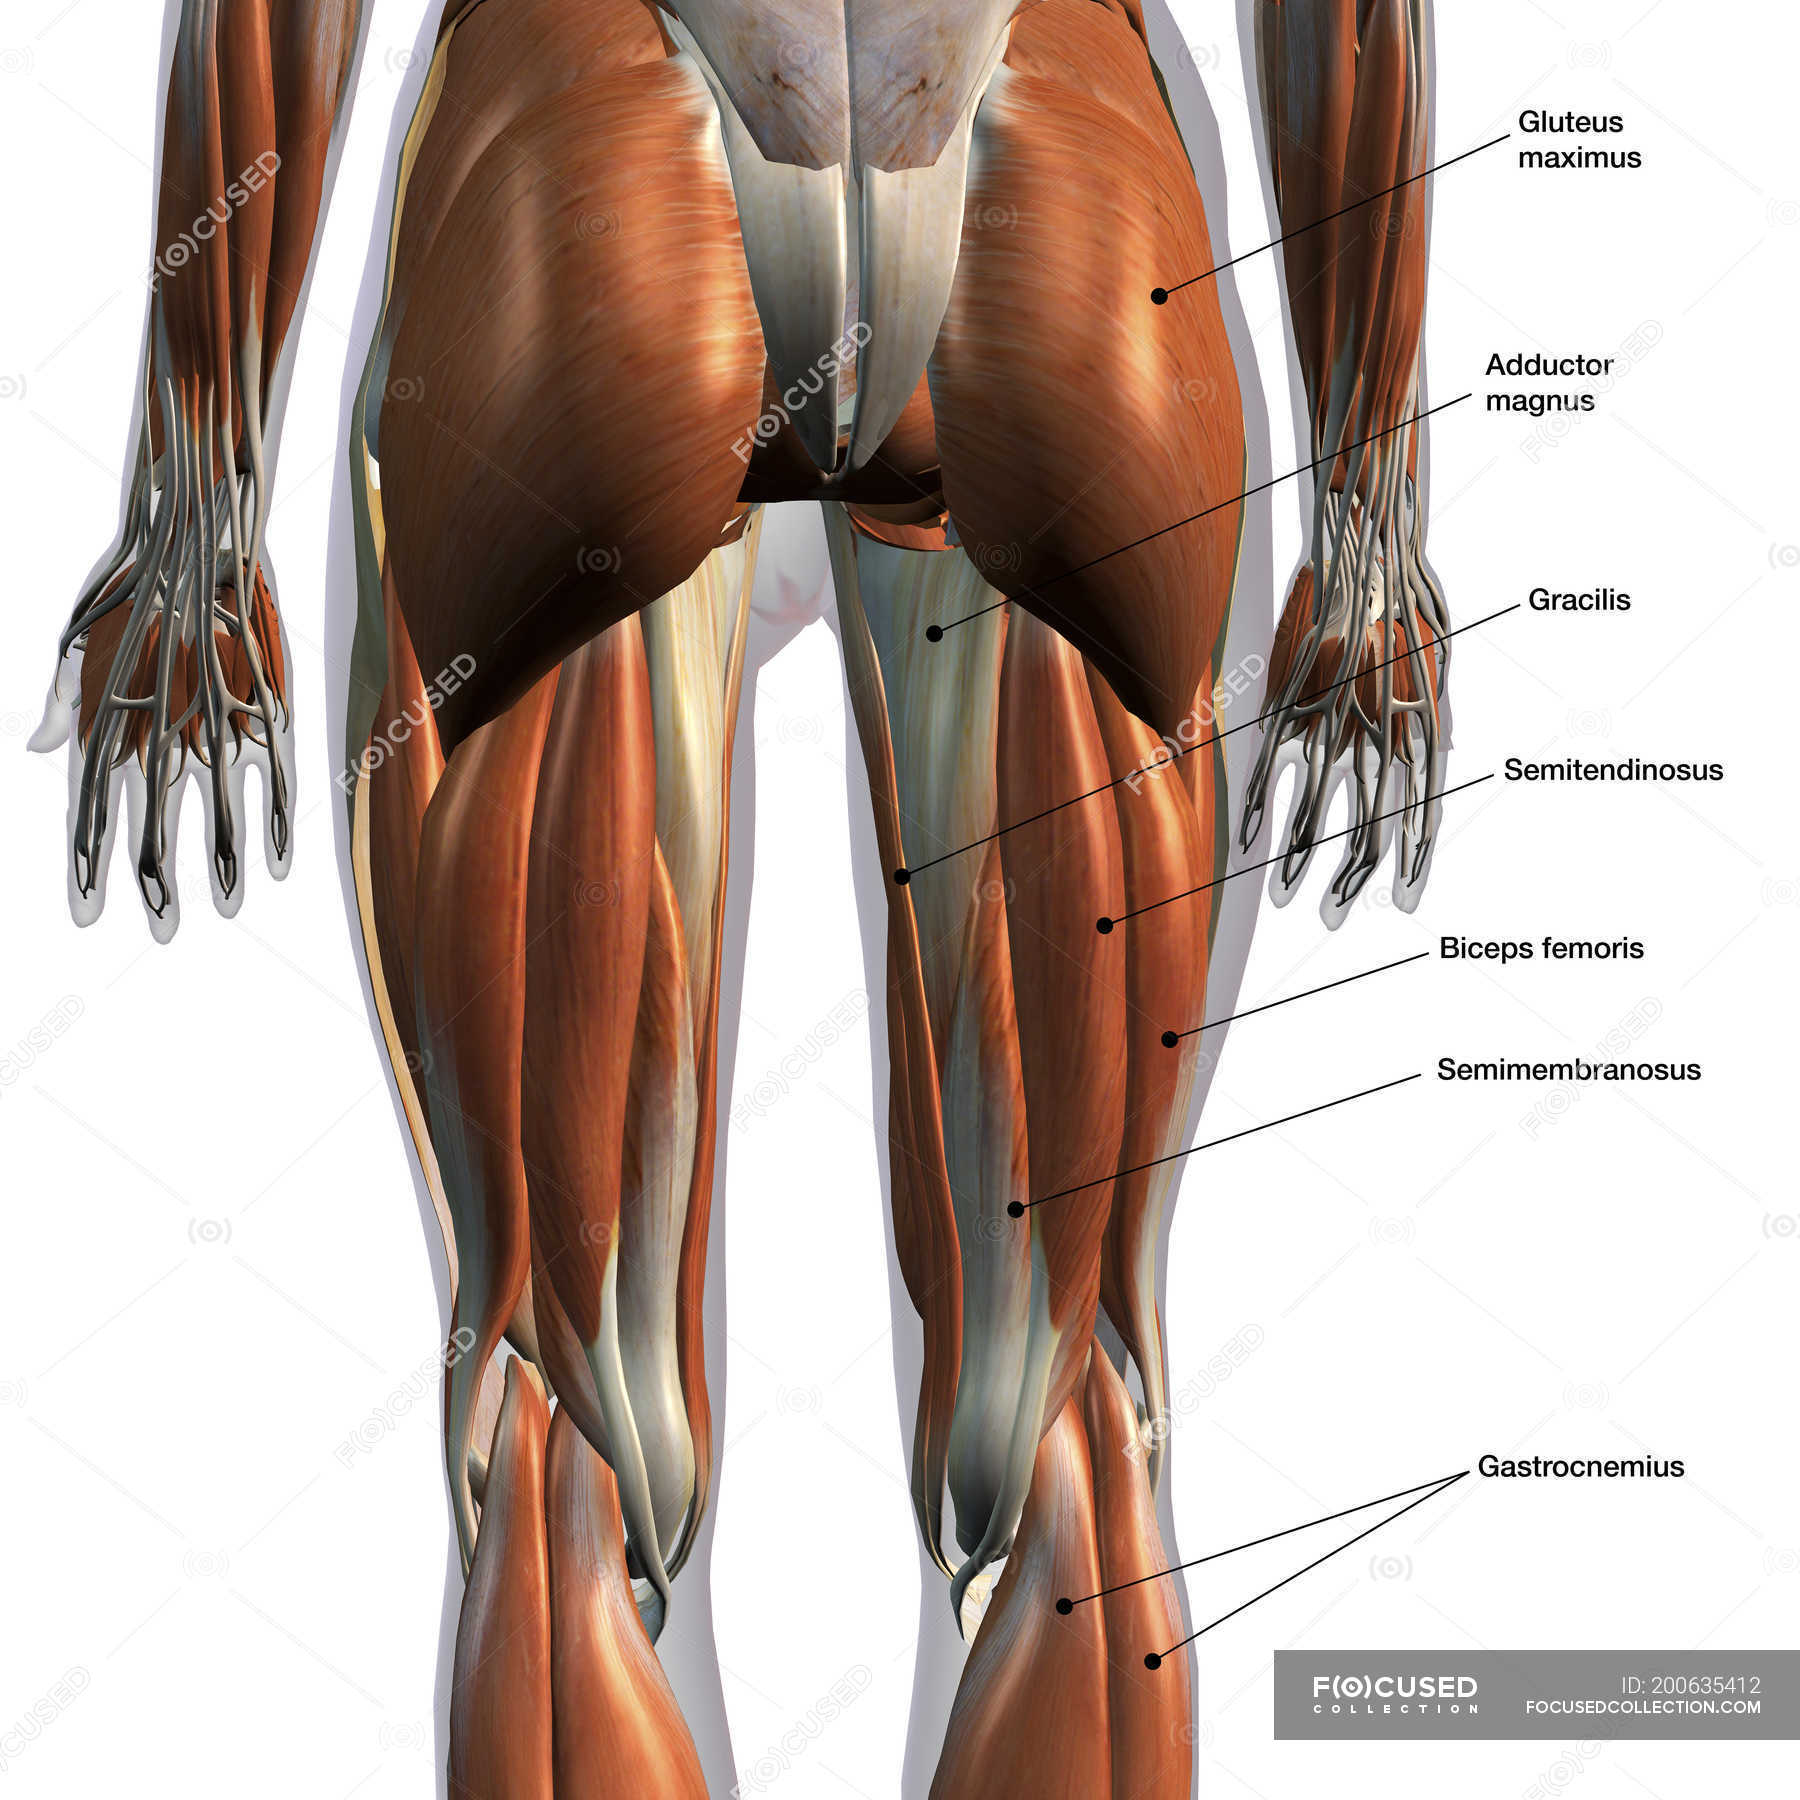 Rear view of leg muscles on white background, with labels — biology